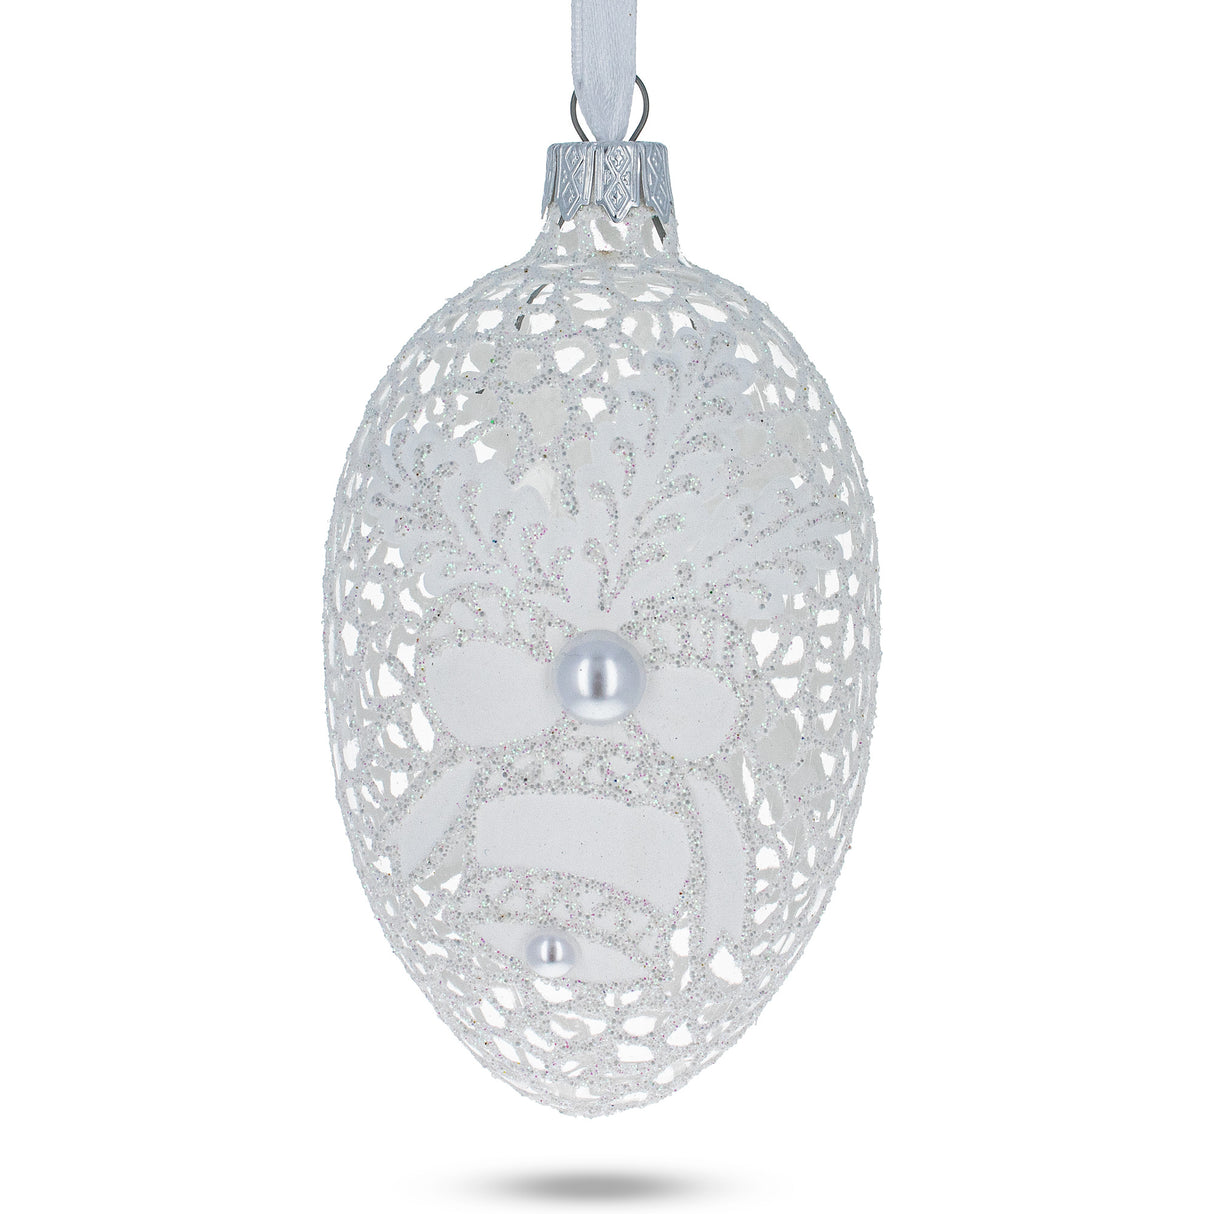 Winter Bells Egg Glass Ornament 4 Inches in White color, Oval shape